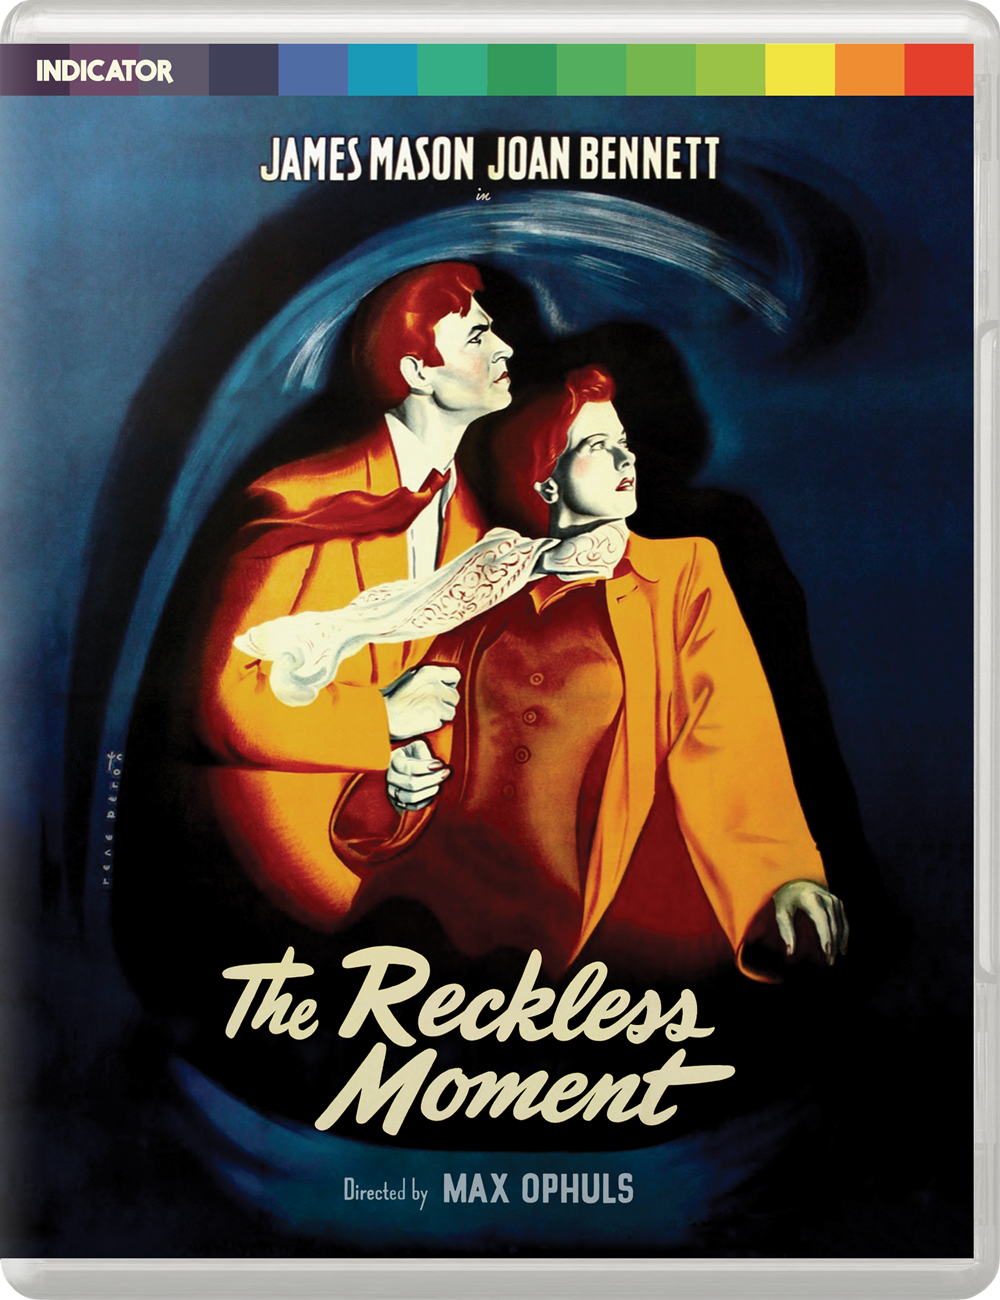 THE RECKLESS MOMENT - LE